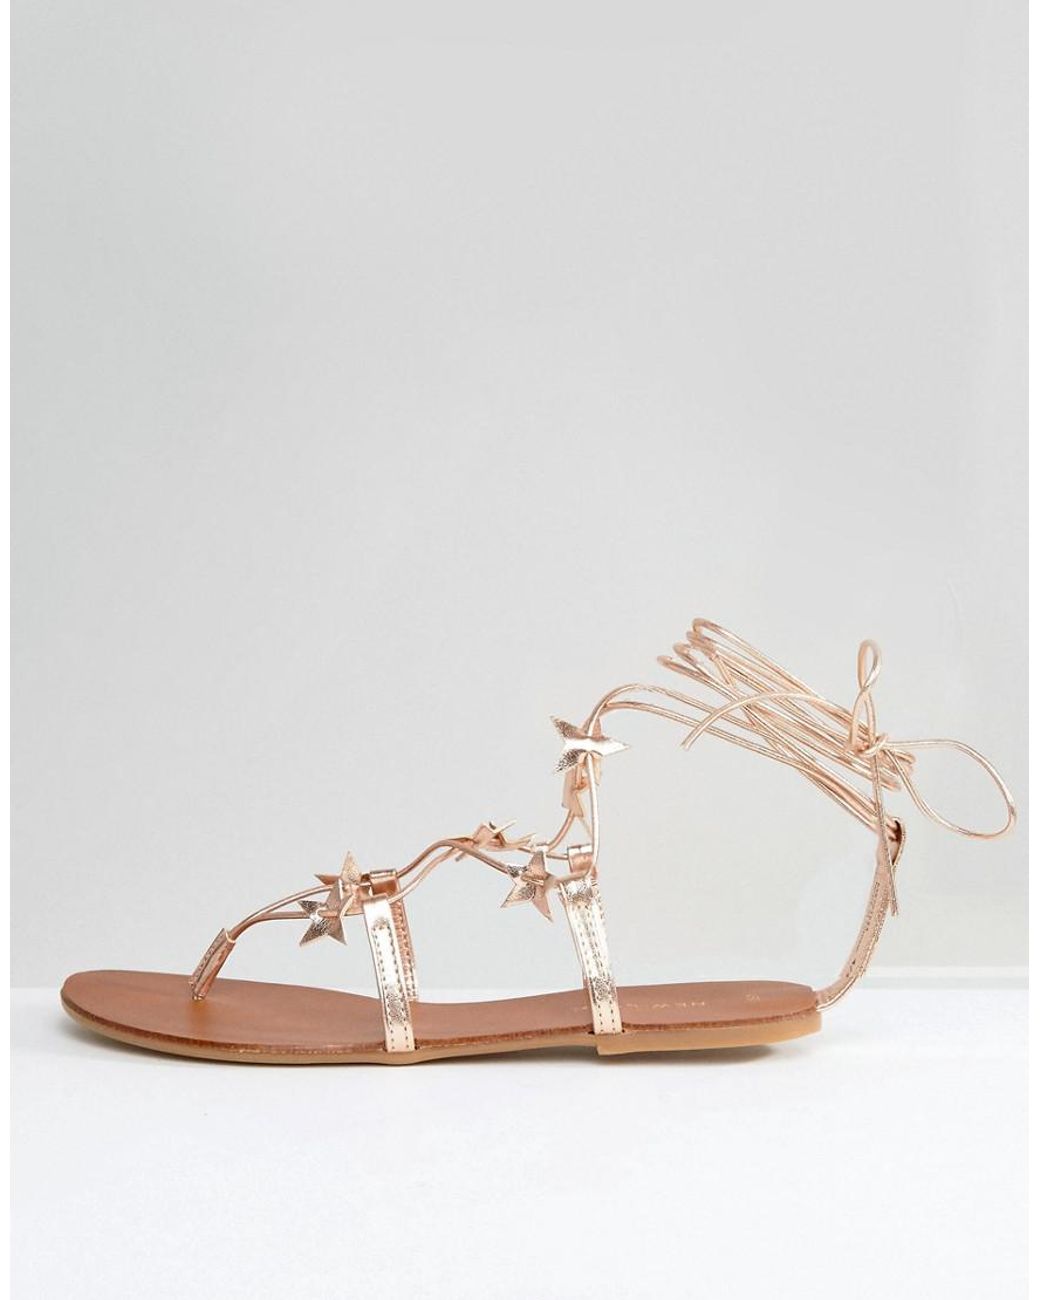 New Look Star Lace Up Flat Sandal in Metallic | Lyst